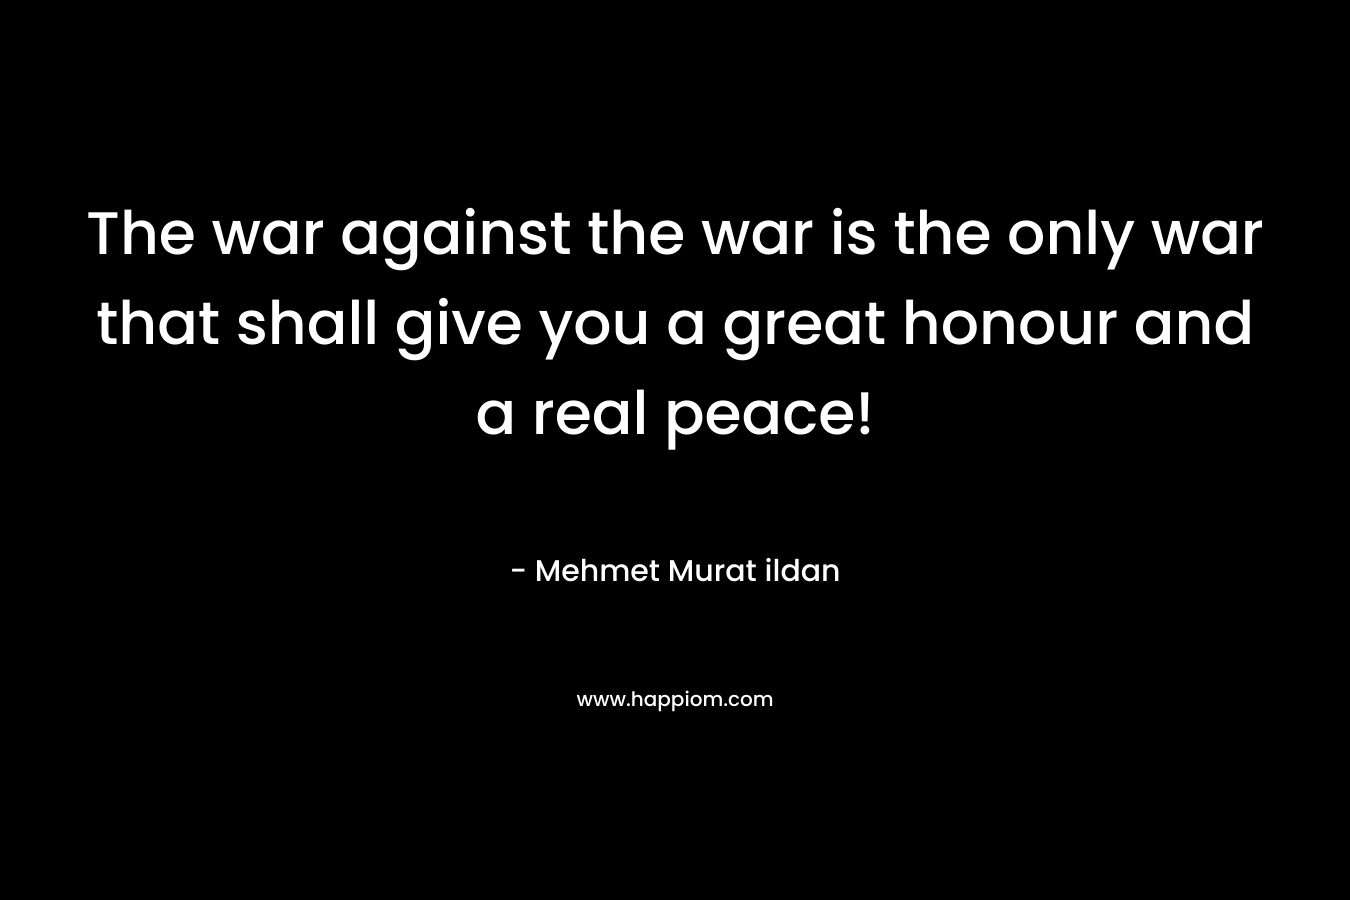 The war against the war is the only war that shall give you a great honour and a real peace!